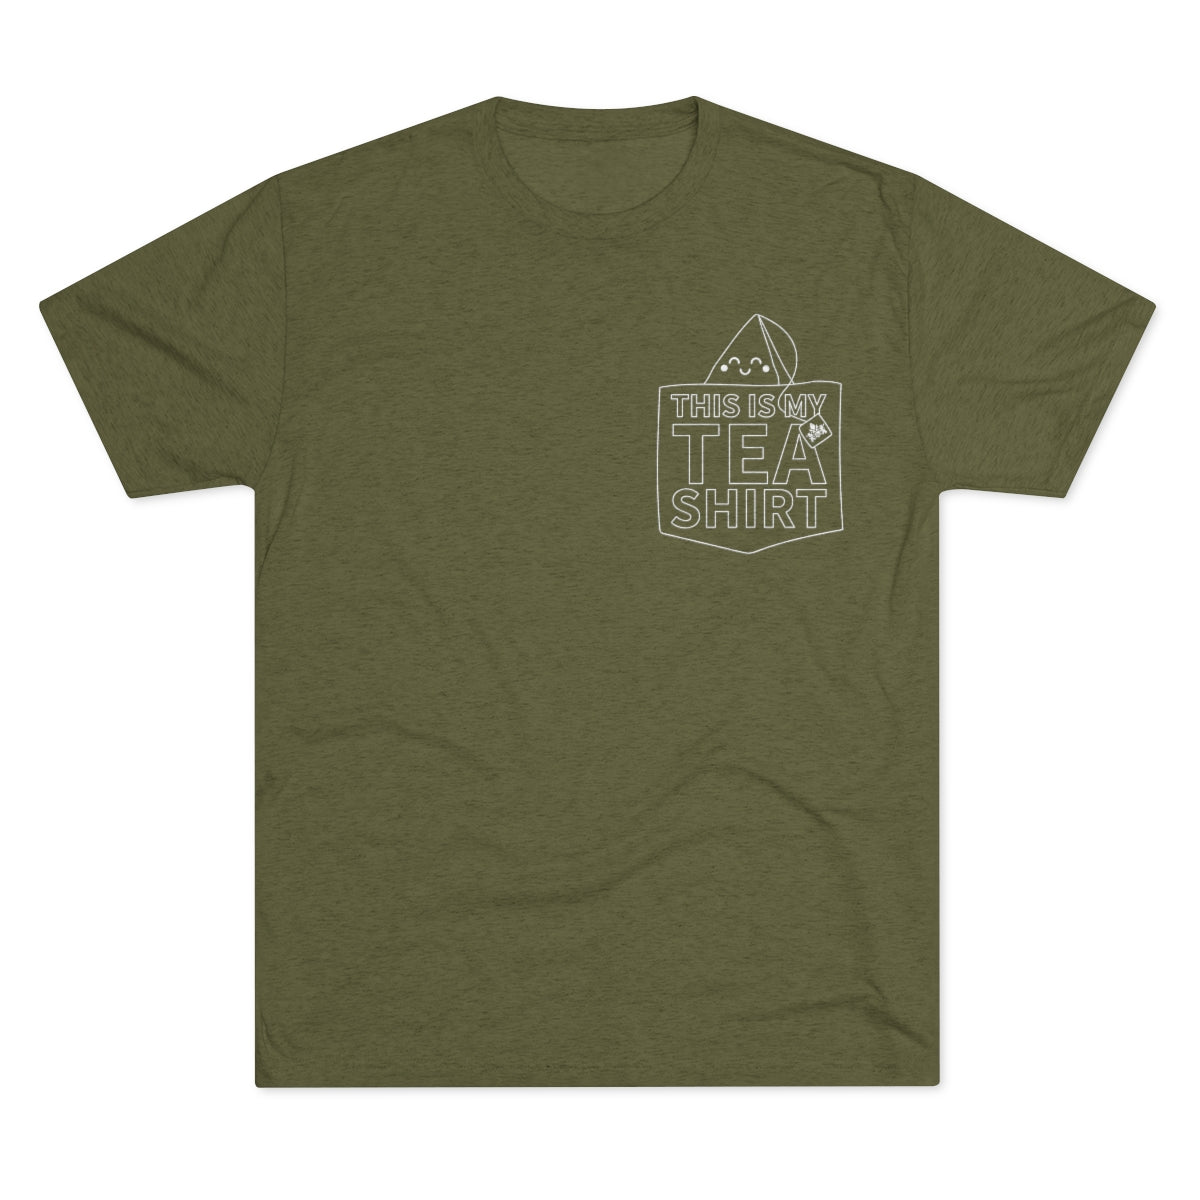 This Is My Tea Shirt Graphic Tee - Tri-Blend Military Green S - Harney & Sons Fine Teas